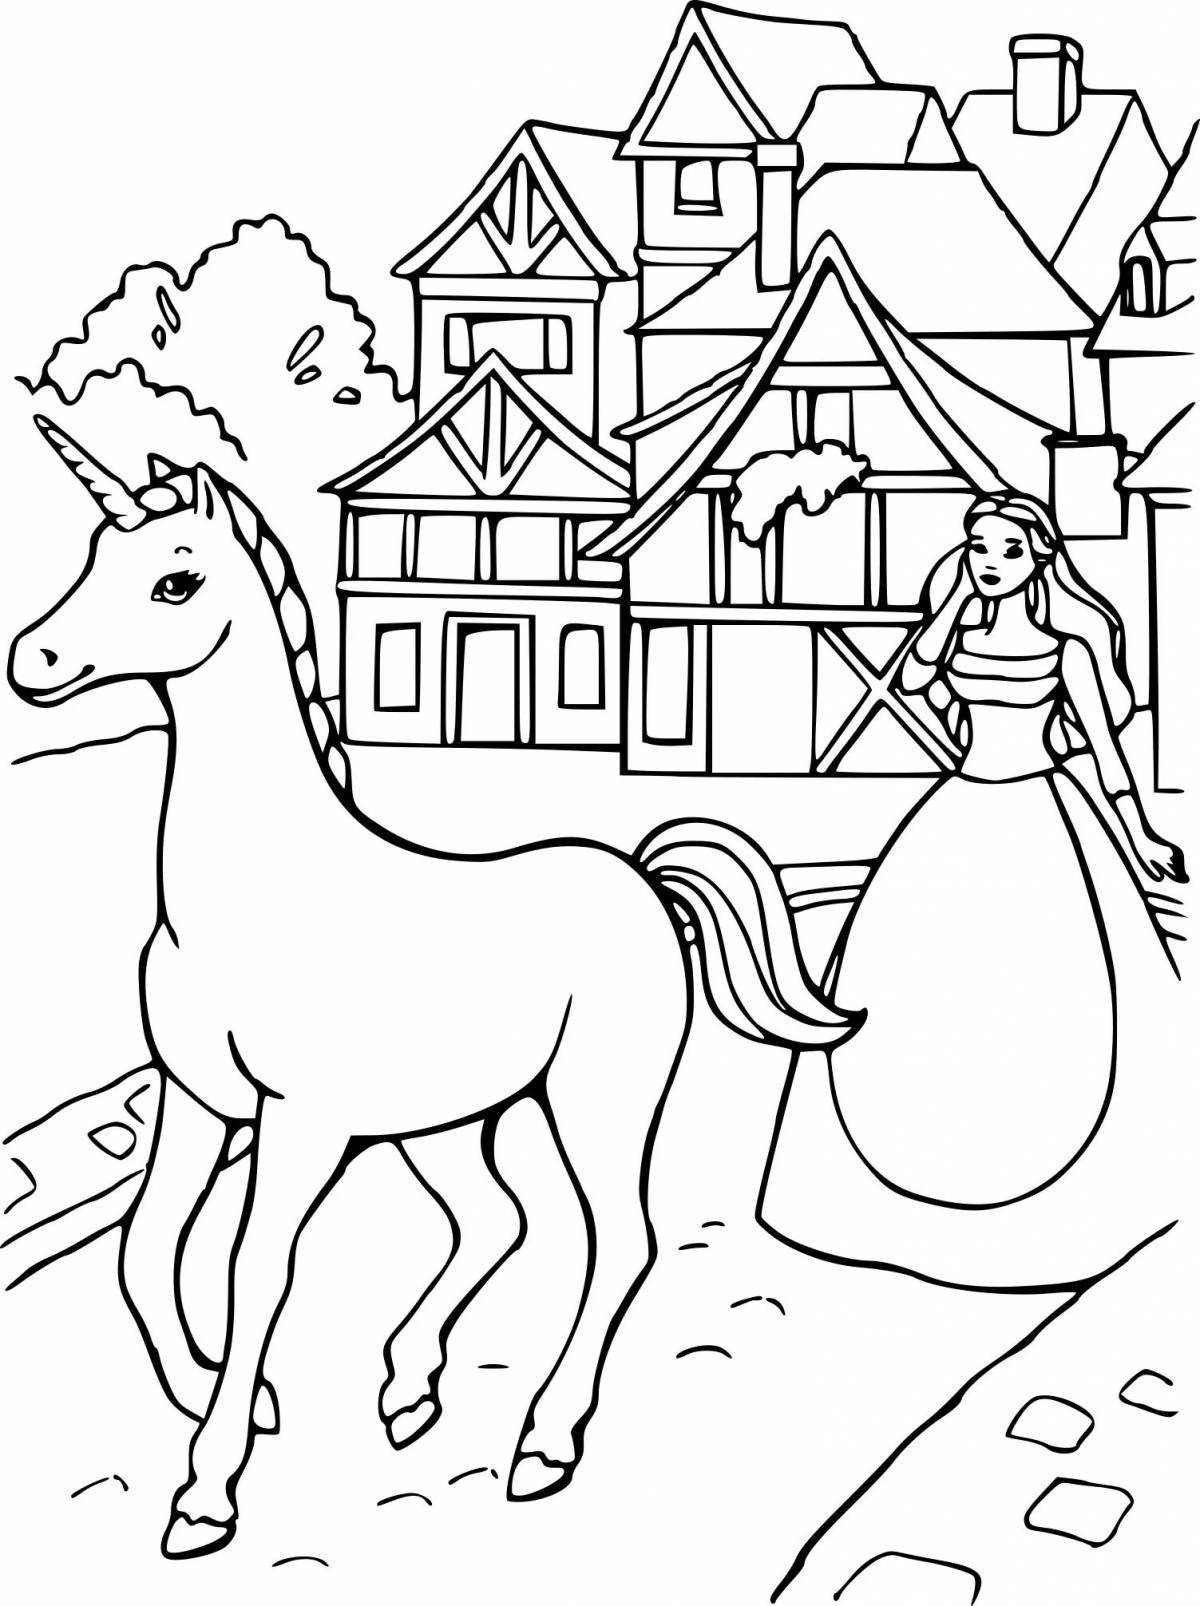 Awesome unicorn barbie coloring book